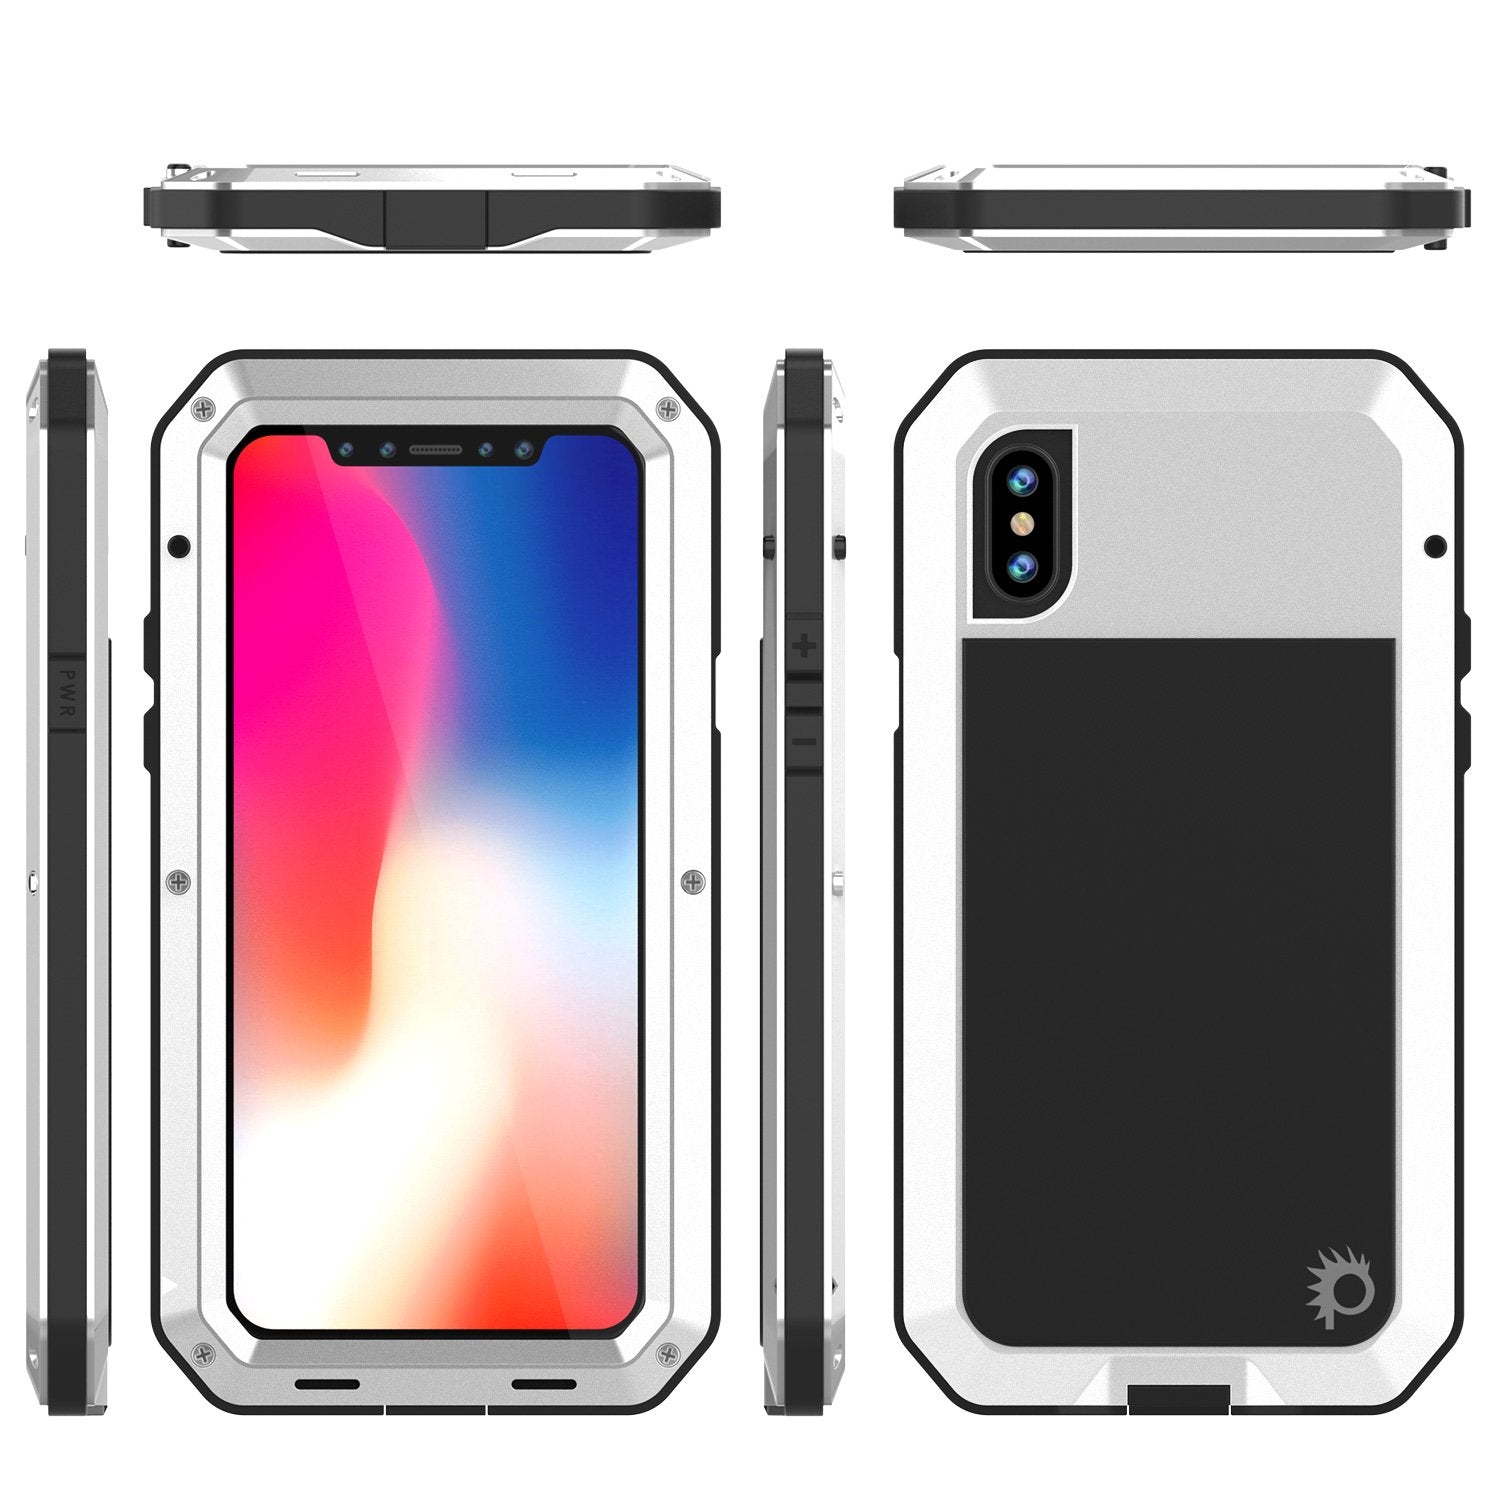 iPhone X Metal Case, Heavy Duty Military Grade Rugged Armor Cover [shock proof] Hybrid Full Body Hard Aluminum & TPU Design [non slip] W/ Prime Drop Protection for Apple iPhone 10 [White]